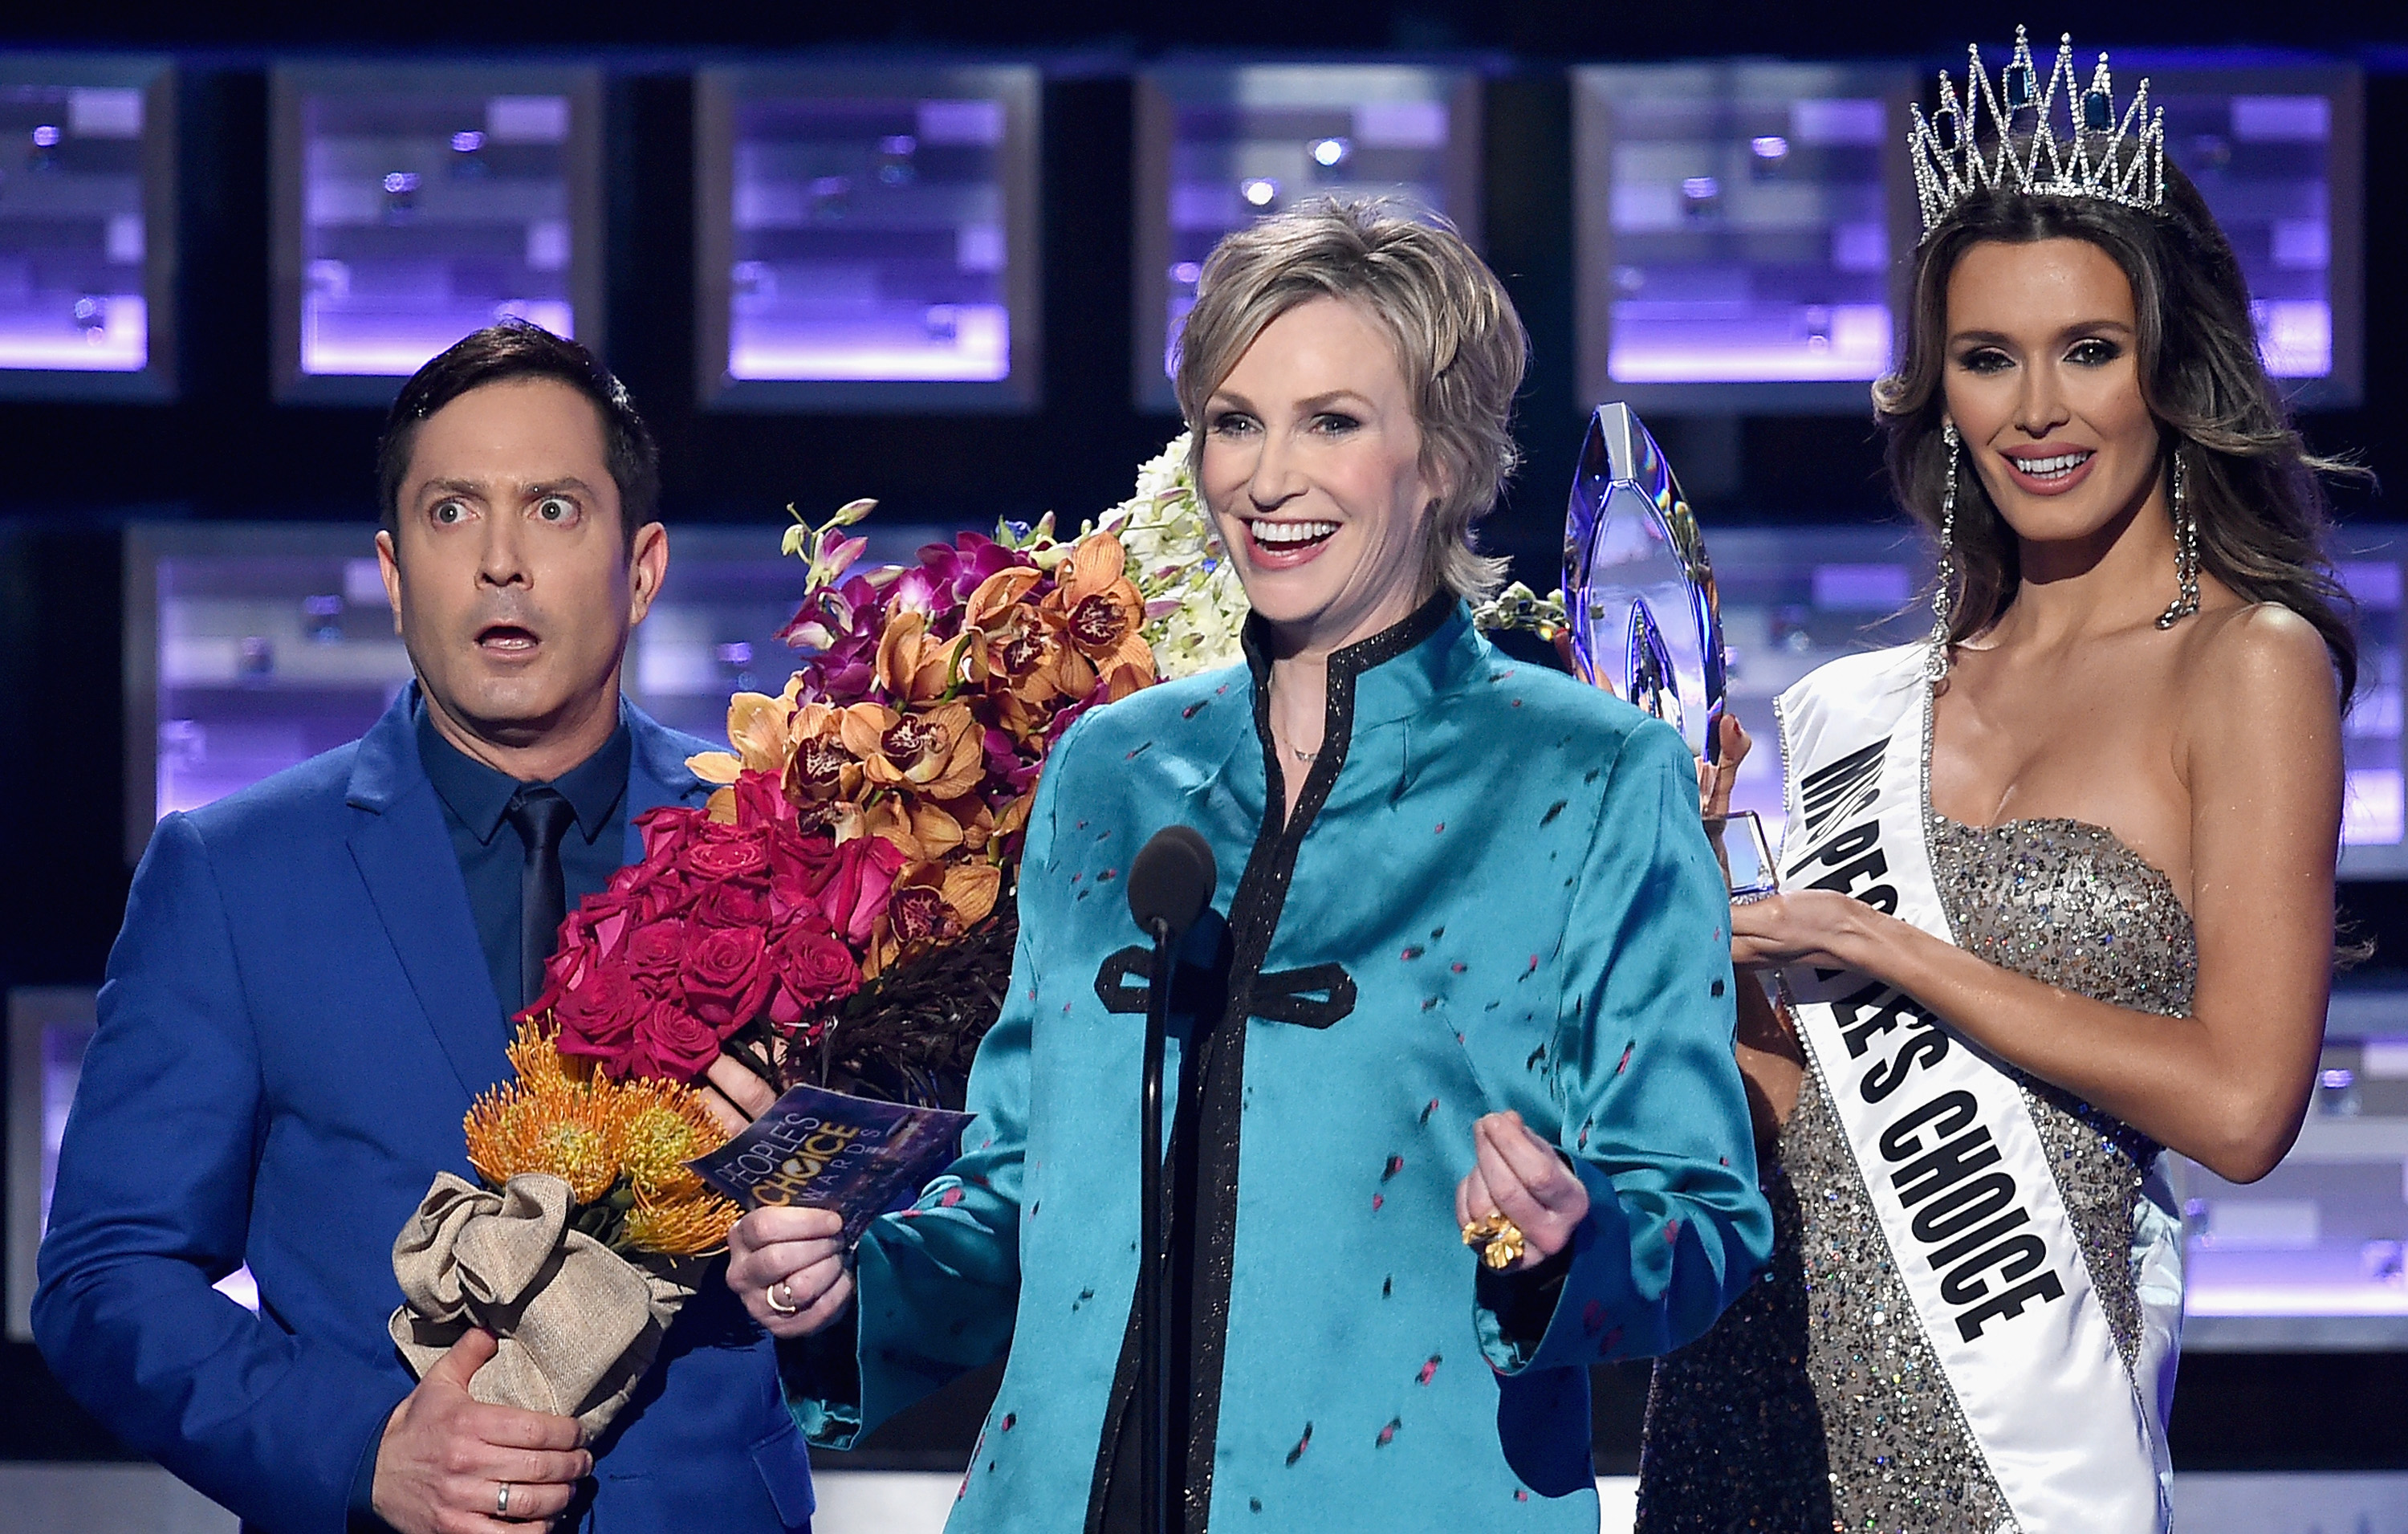 LOS ANGELES, CA - JANUARY 06: (L-R) Actor Thomas Lennon, host Jane Lynch, and Miss Colombia Ariadna Gutierrez perform onstage during the People's Choice Awards 2016 at Microsoft Theater on January 6, 2016 in Los Angeles, California. Kevin Winter/Getty Images/AFP